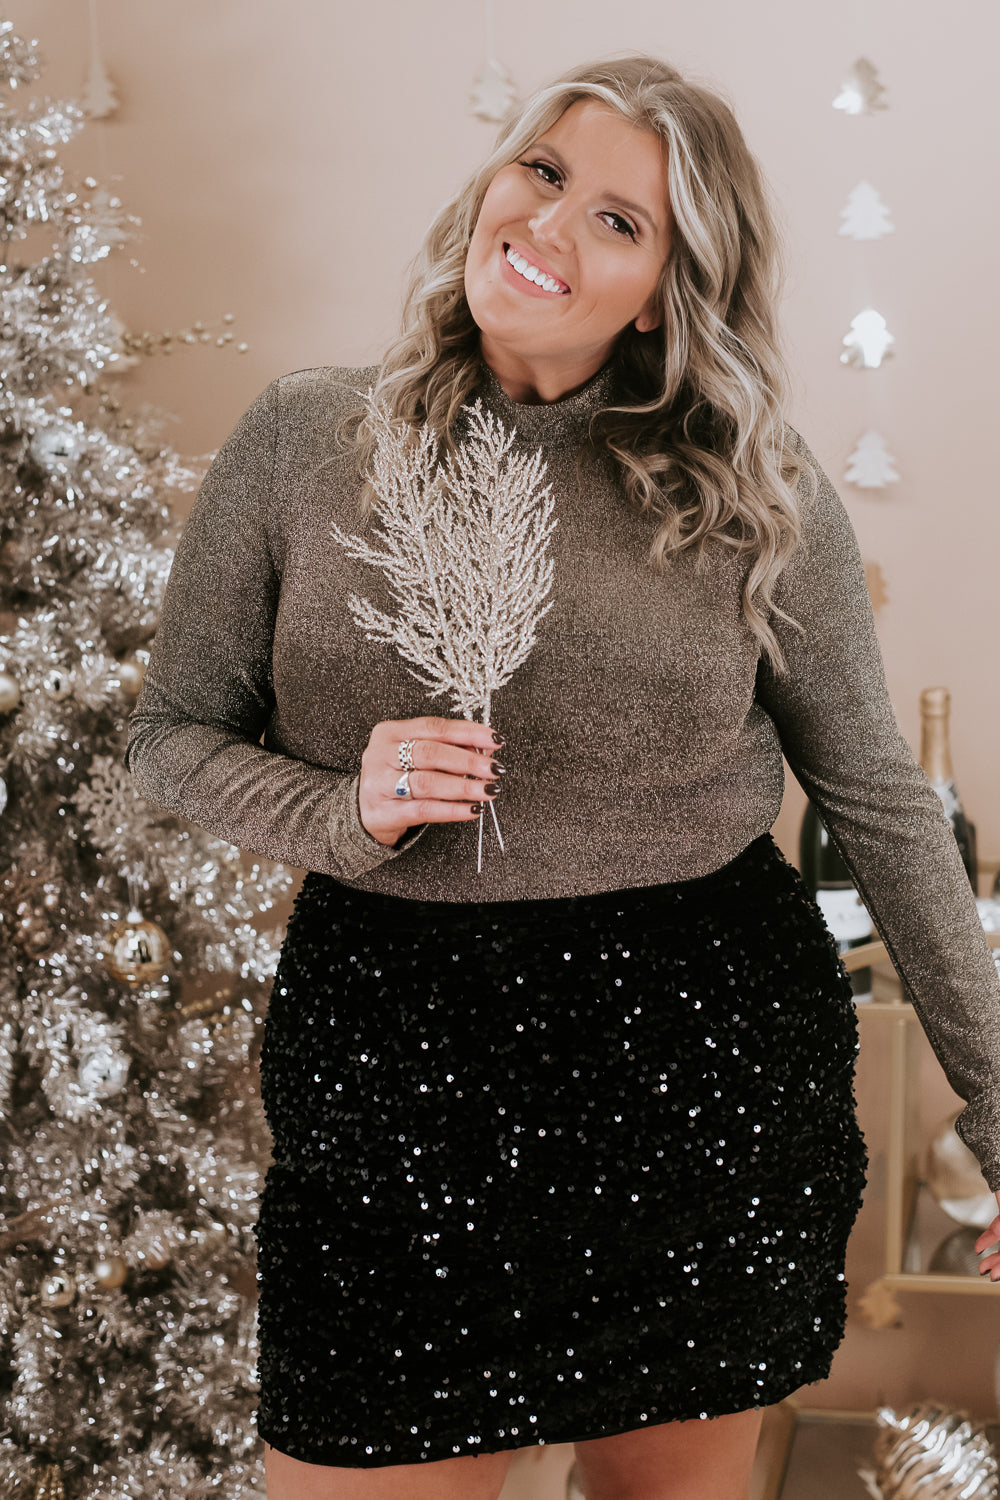 Full Of Cheer Shimmer Bodysuit, Black/Gold – Everyday Chic Boutique